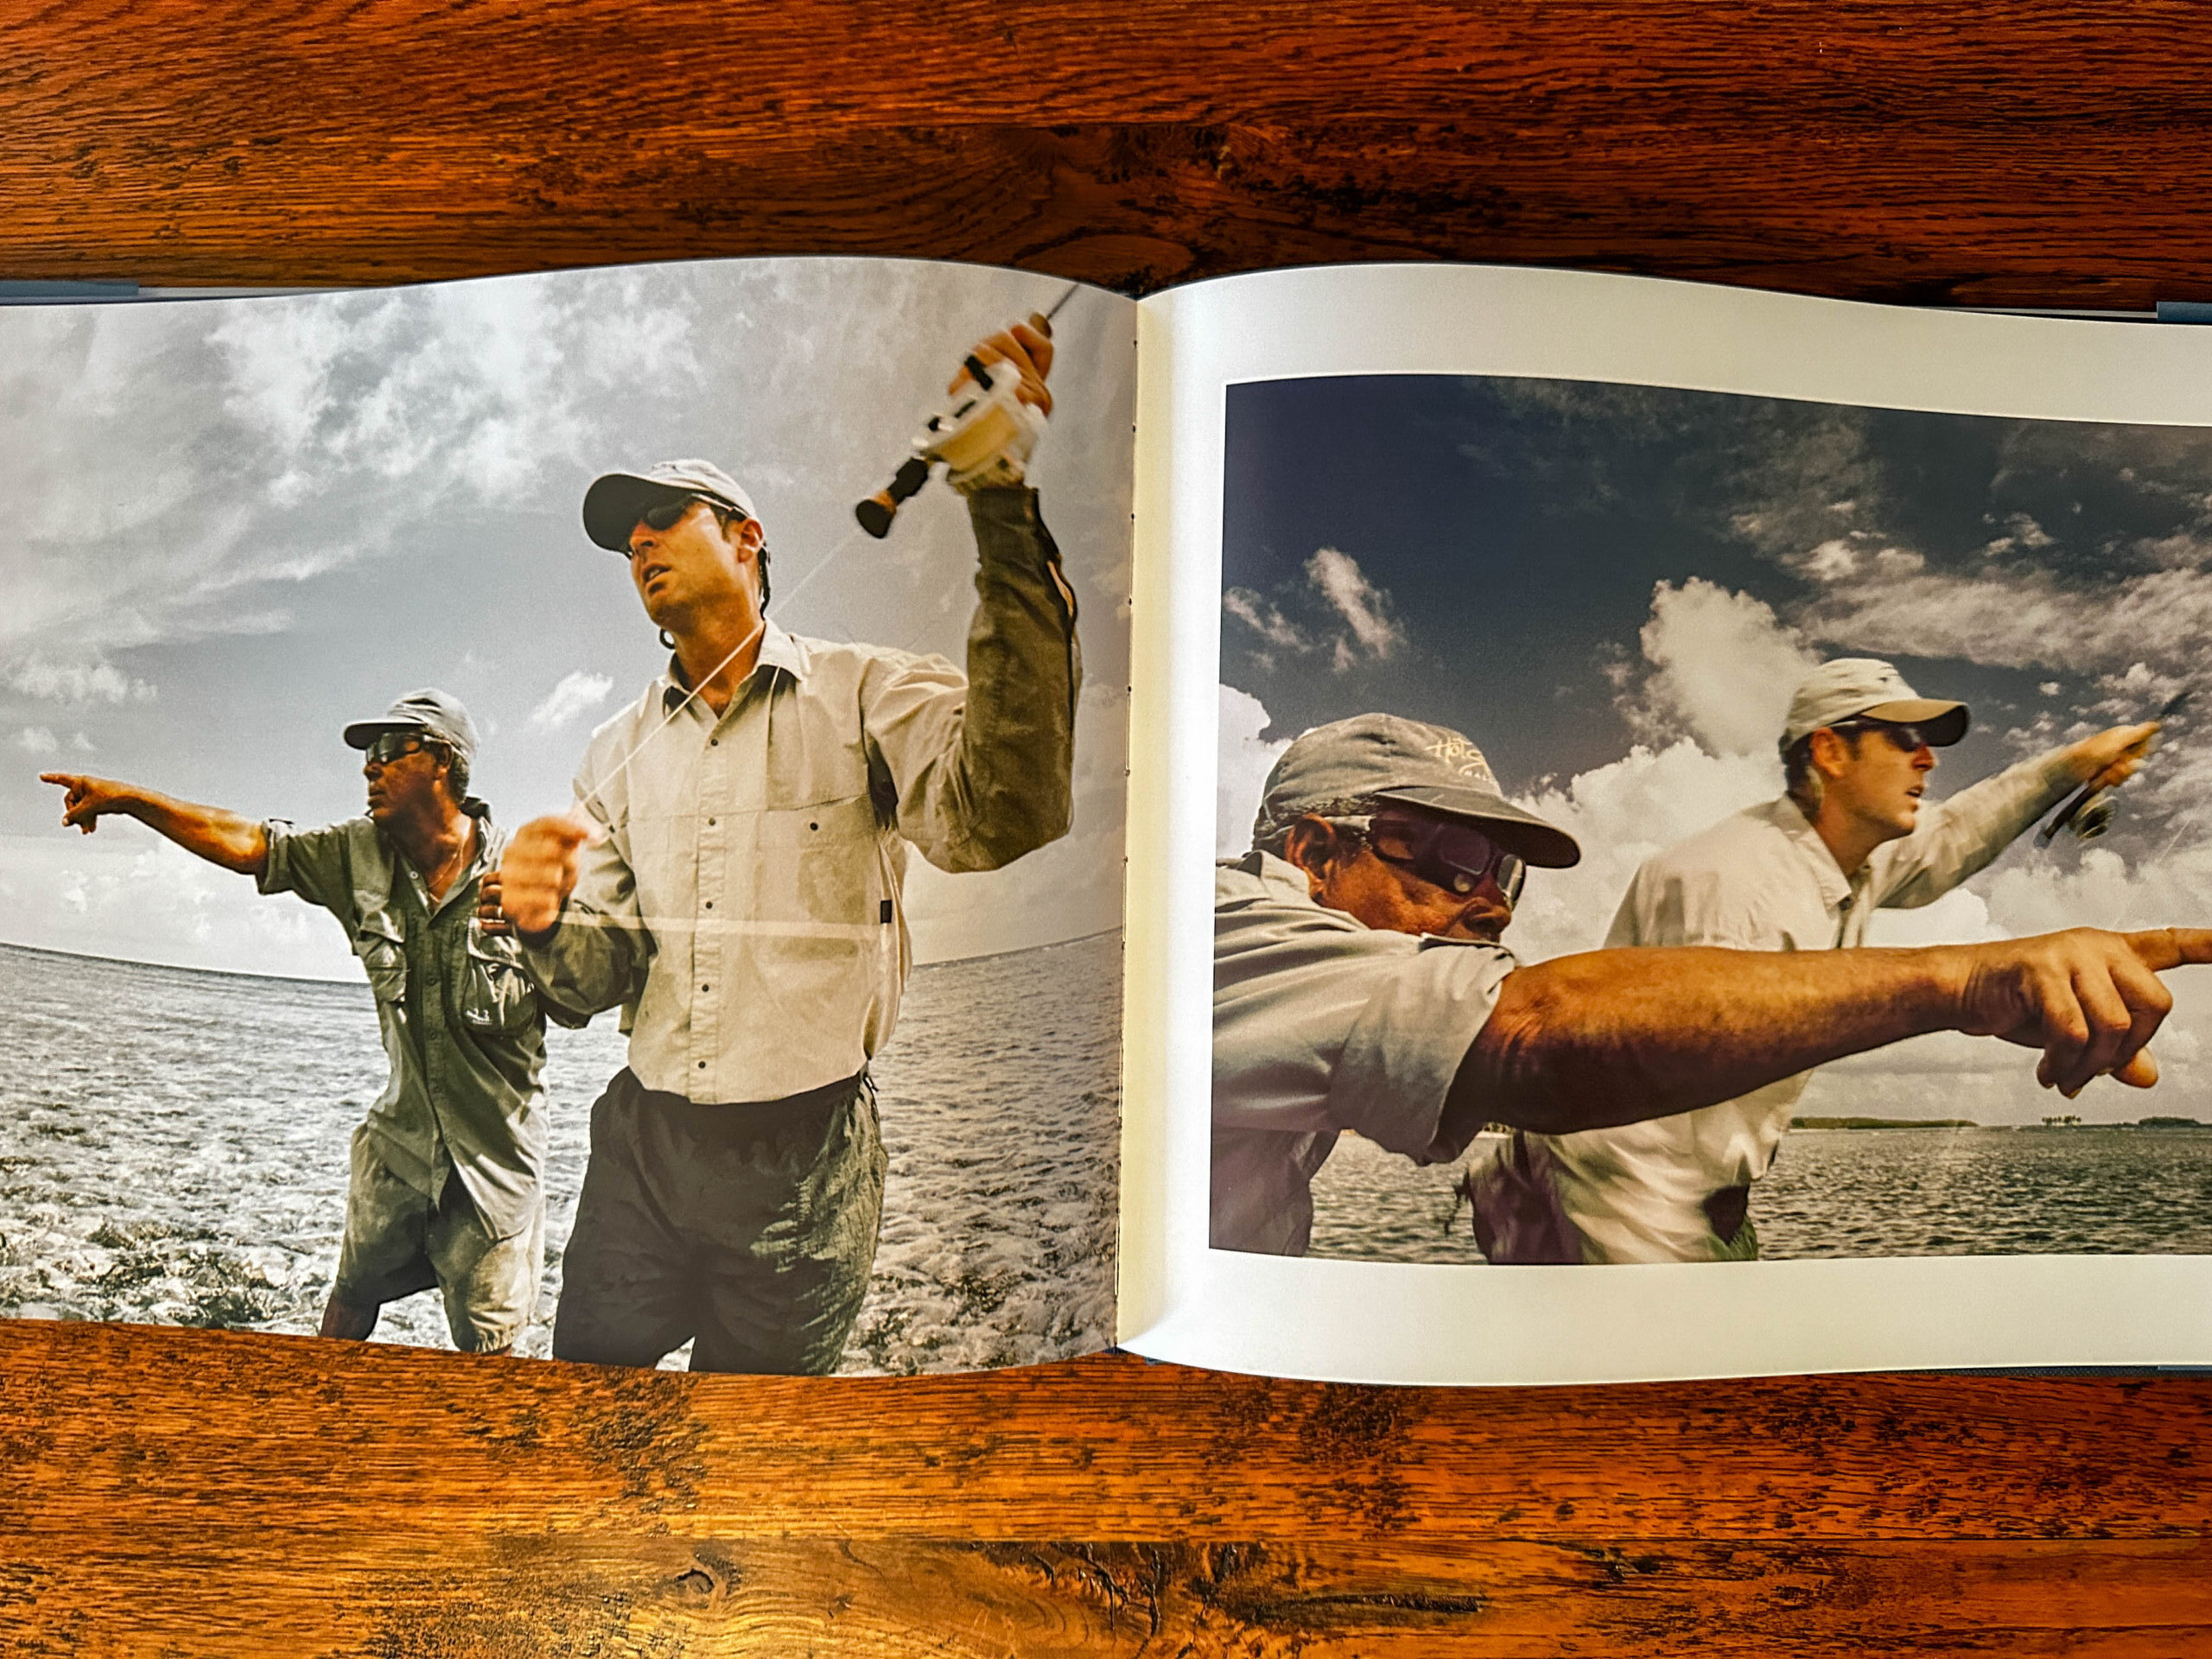 The best fly fishing photo book, Salt.